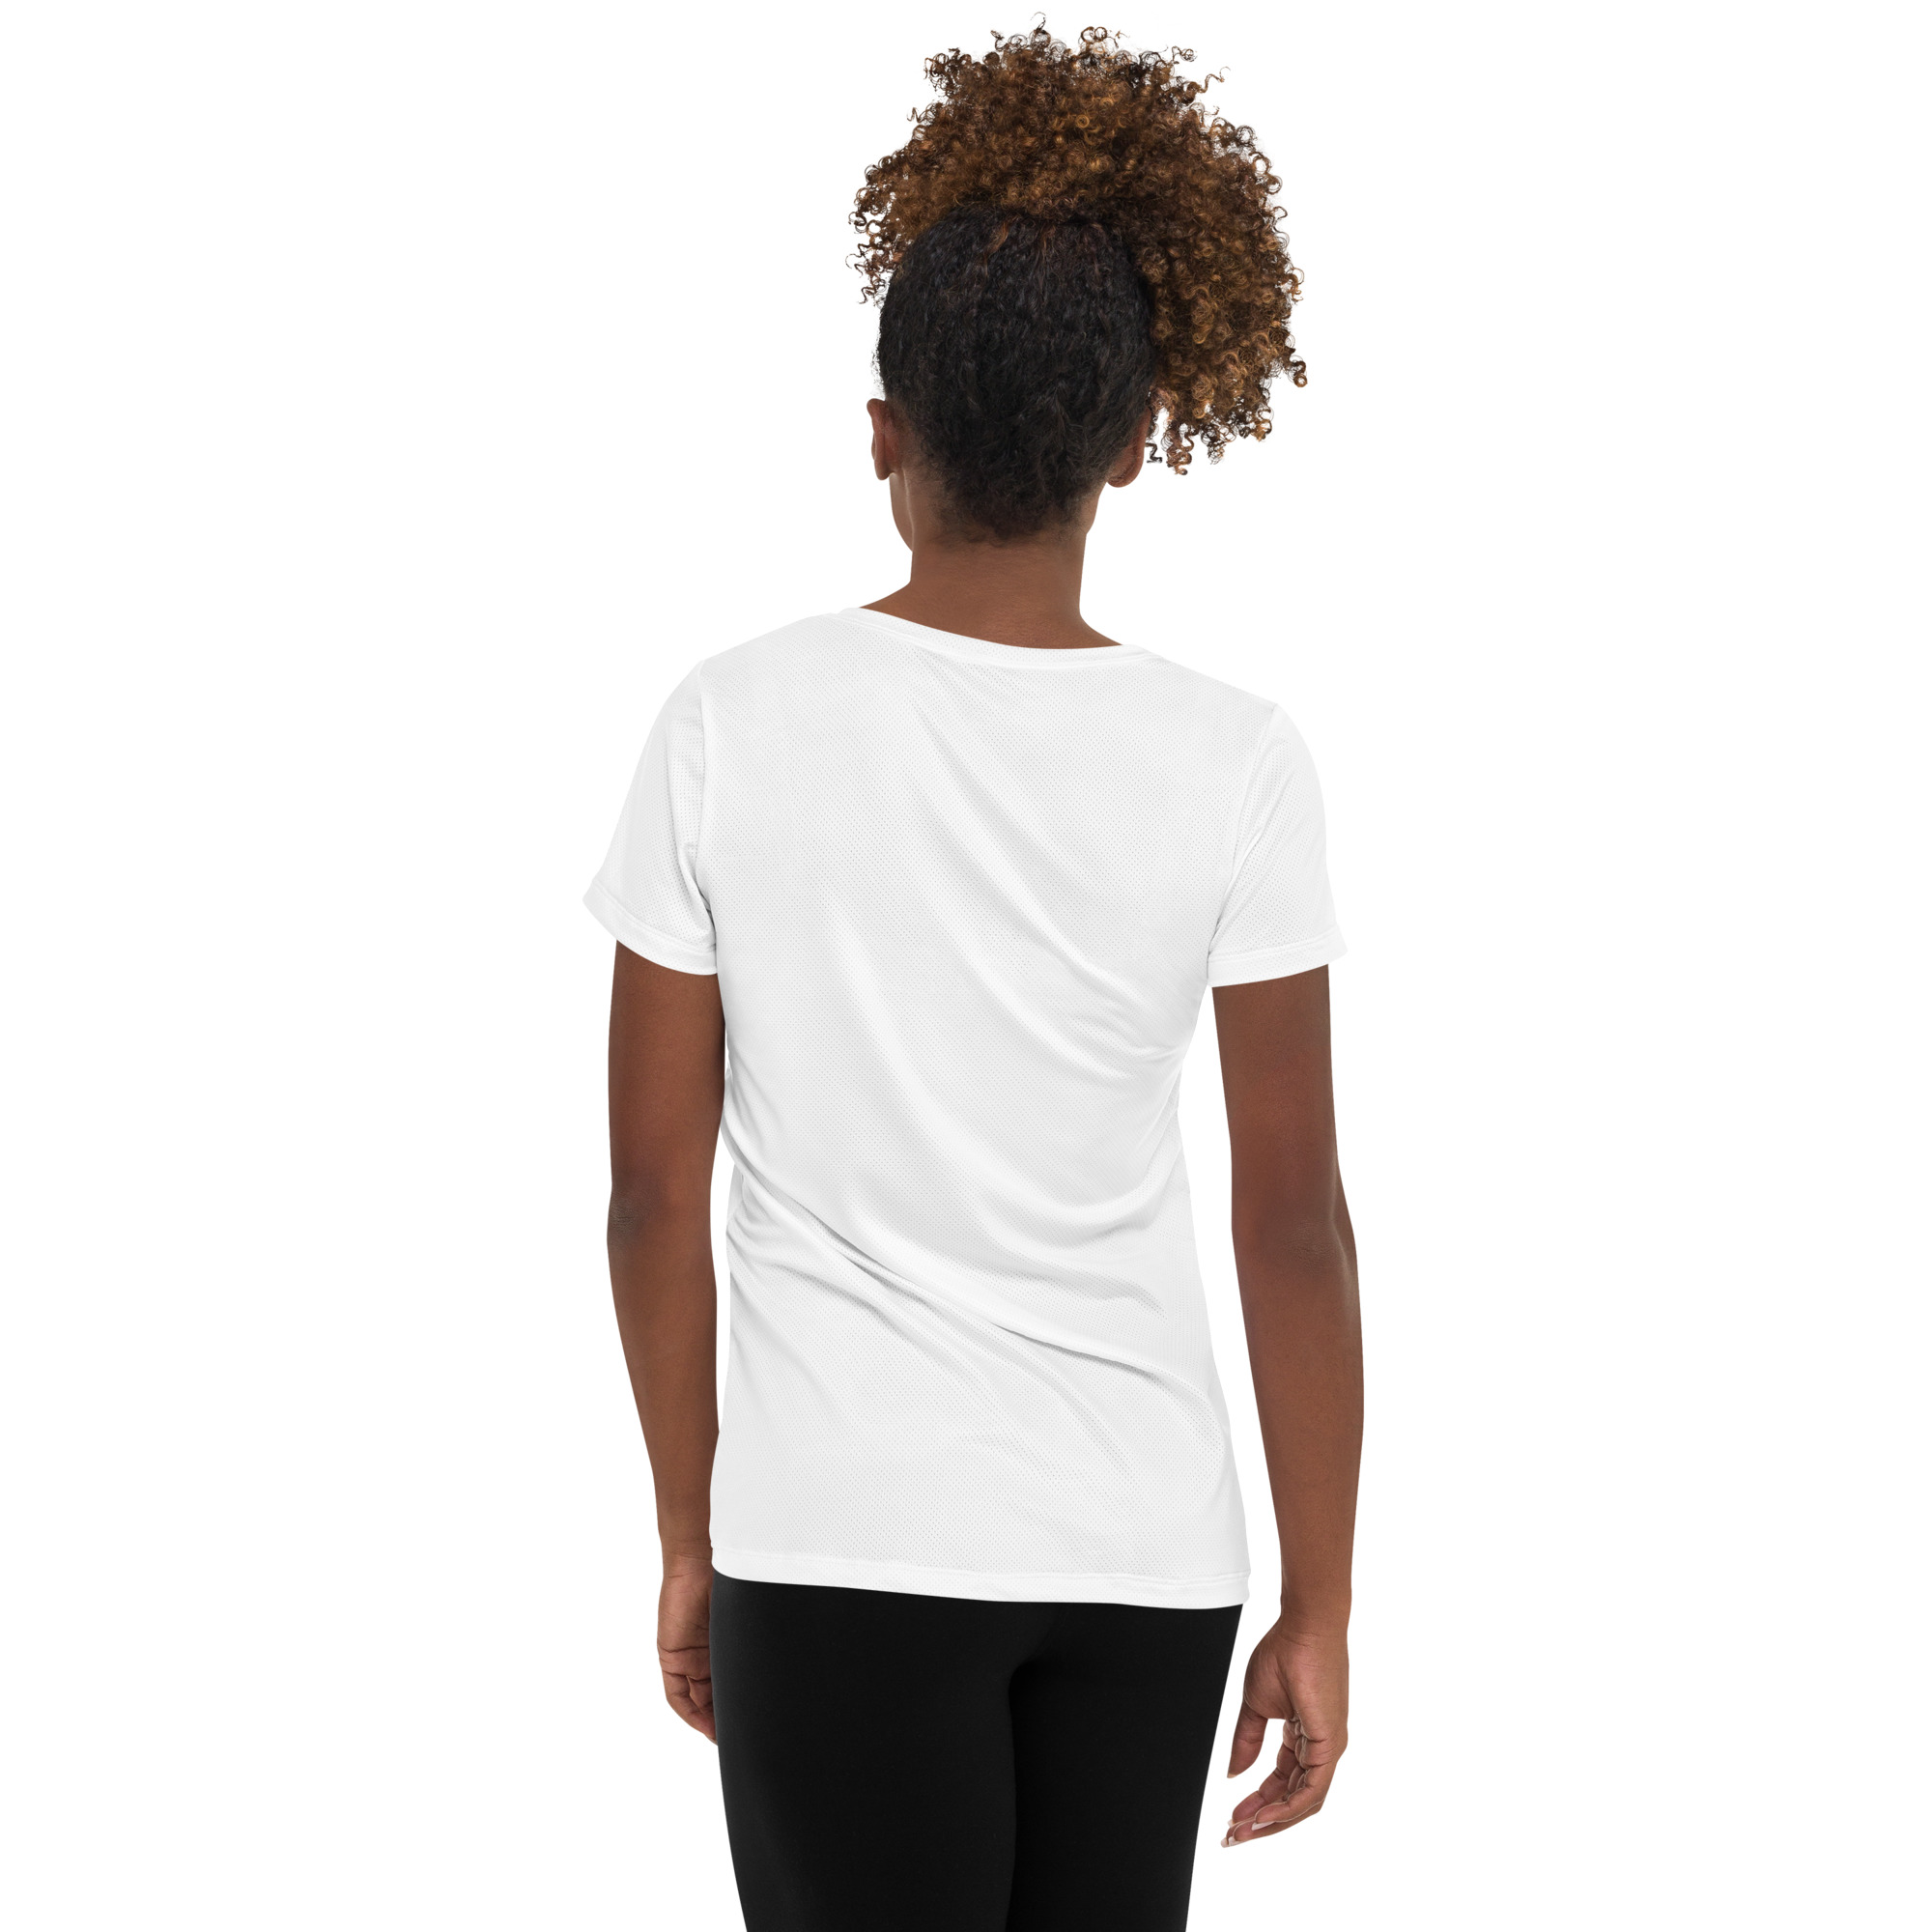 all-over-print-womens-athletic-t-shirt-white-back-65ae49c69a343.jpg